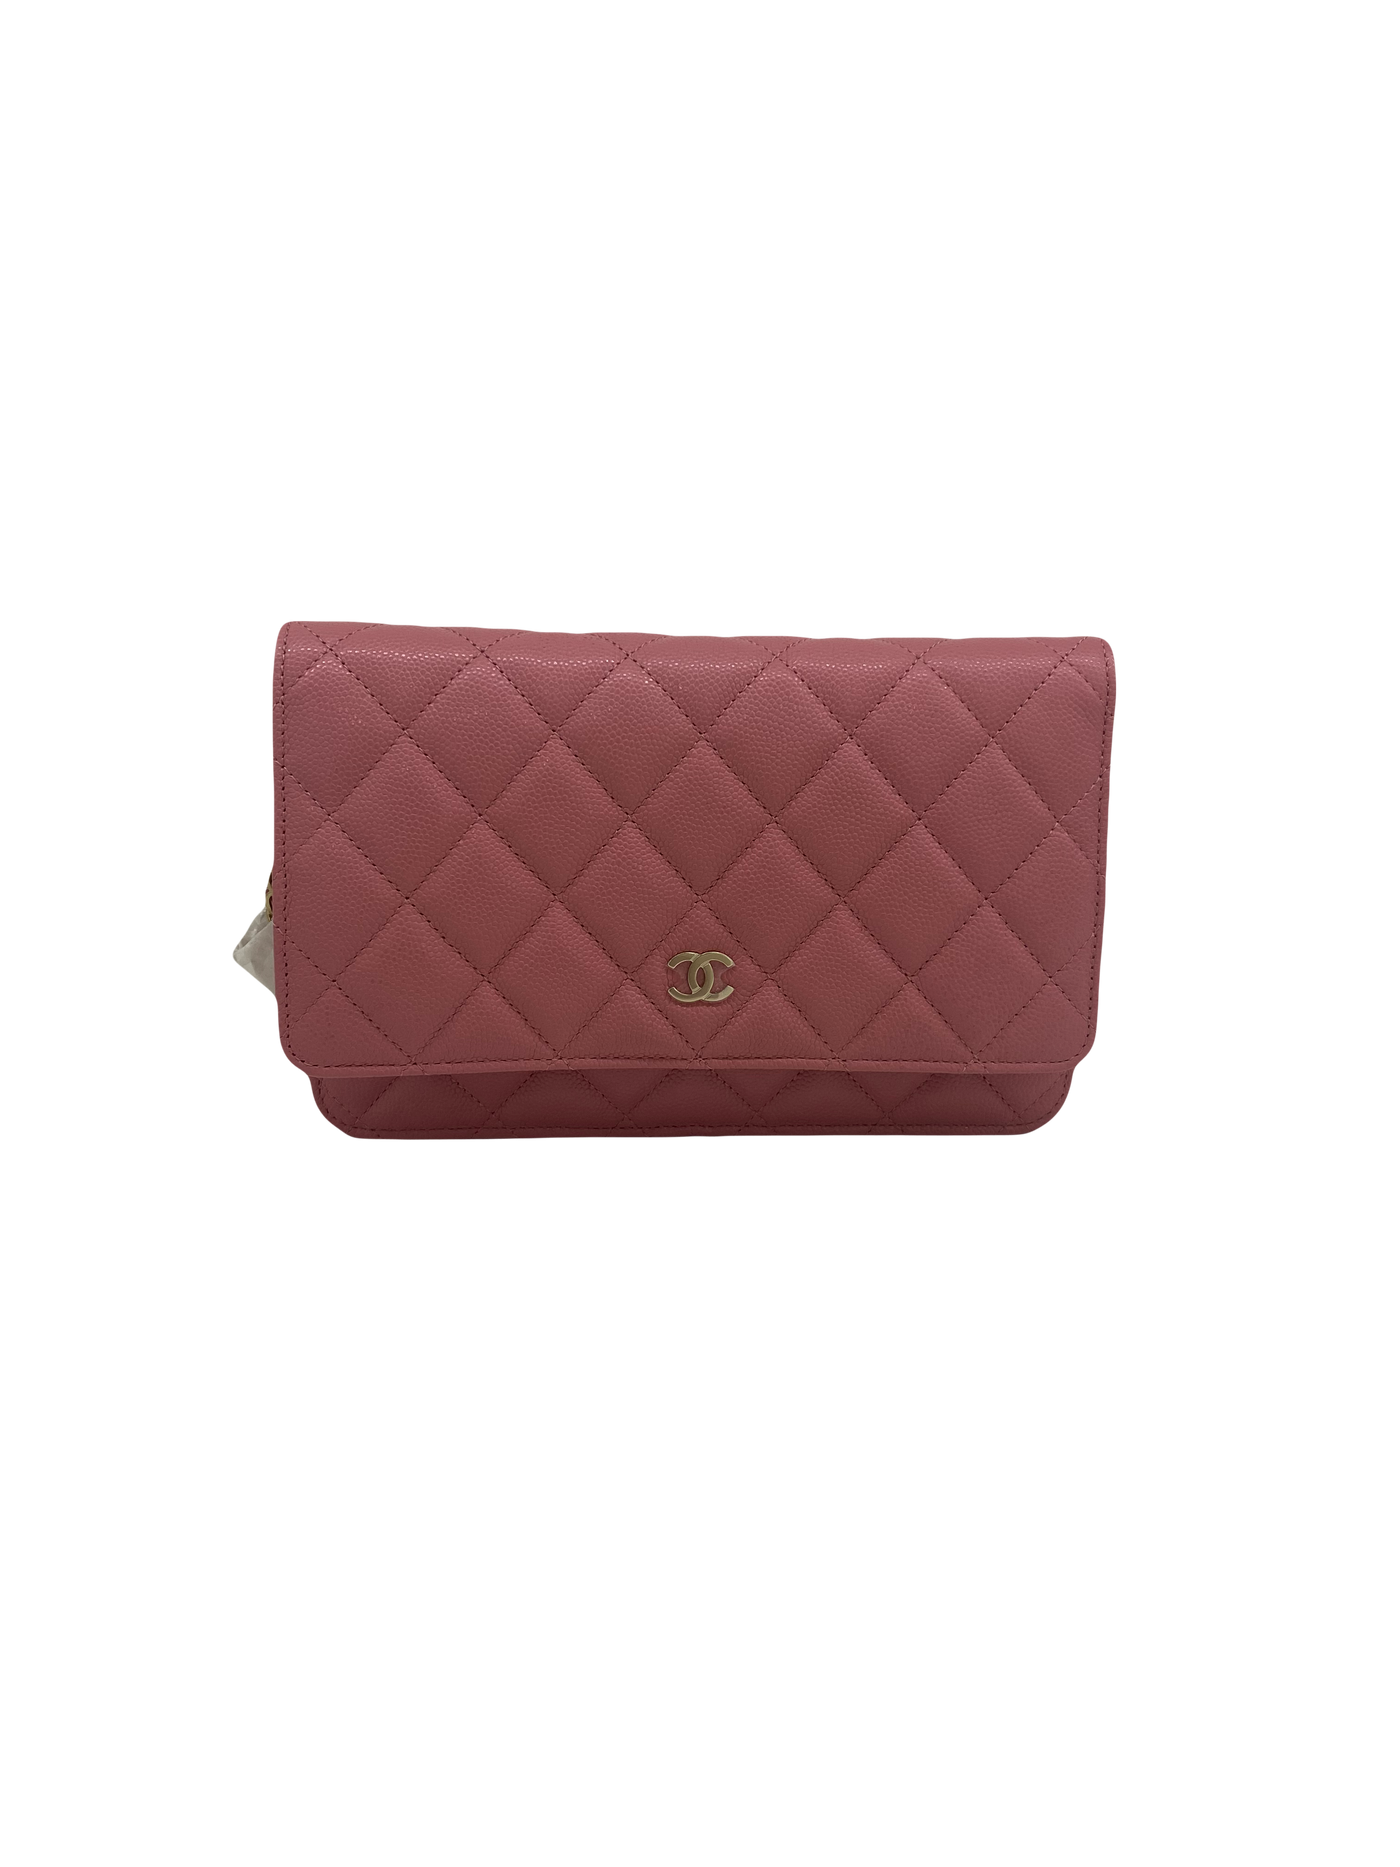 Chanel WOC Pink Caviar Leather